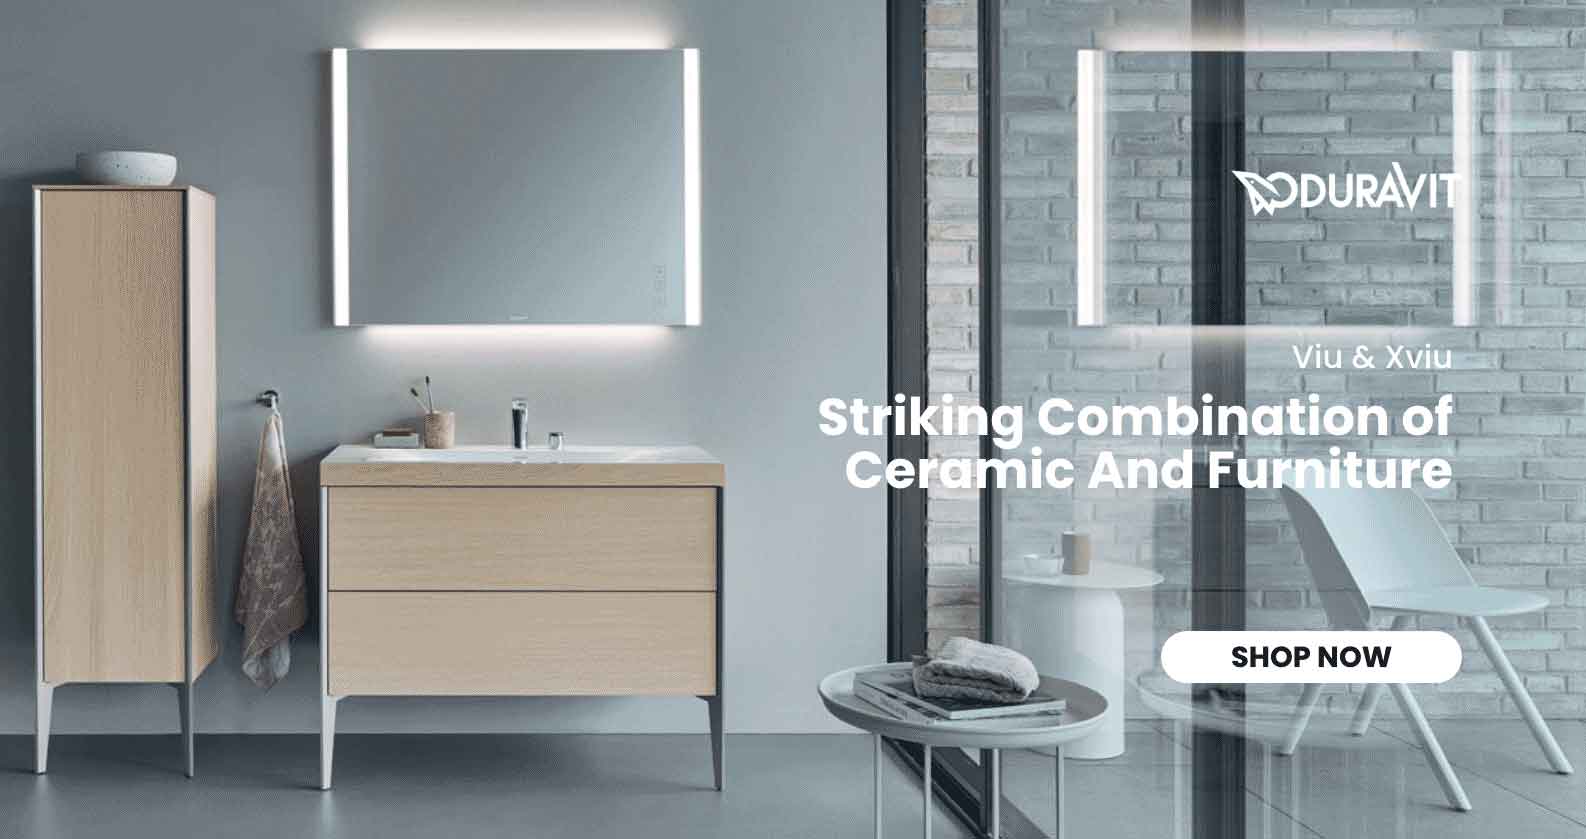 Duravit XView at xTWOstore